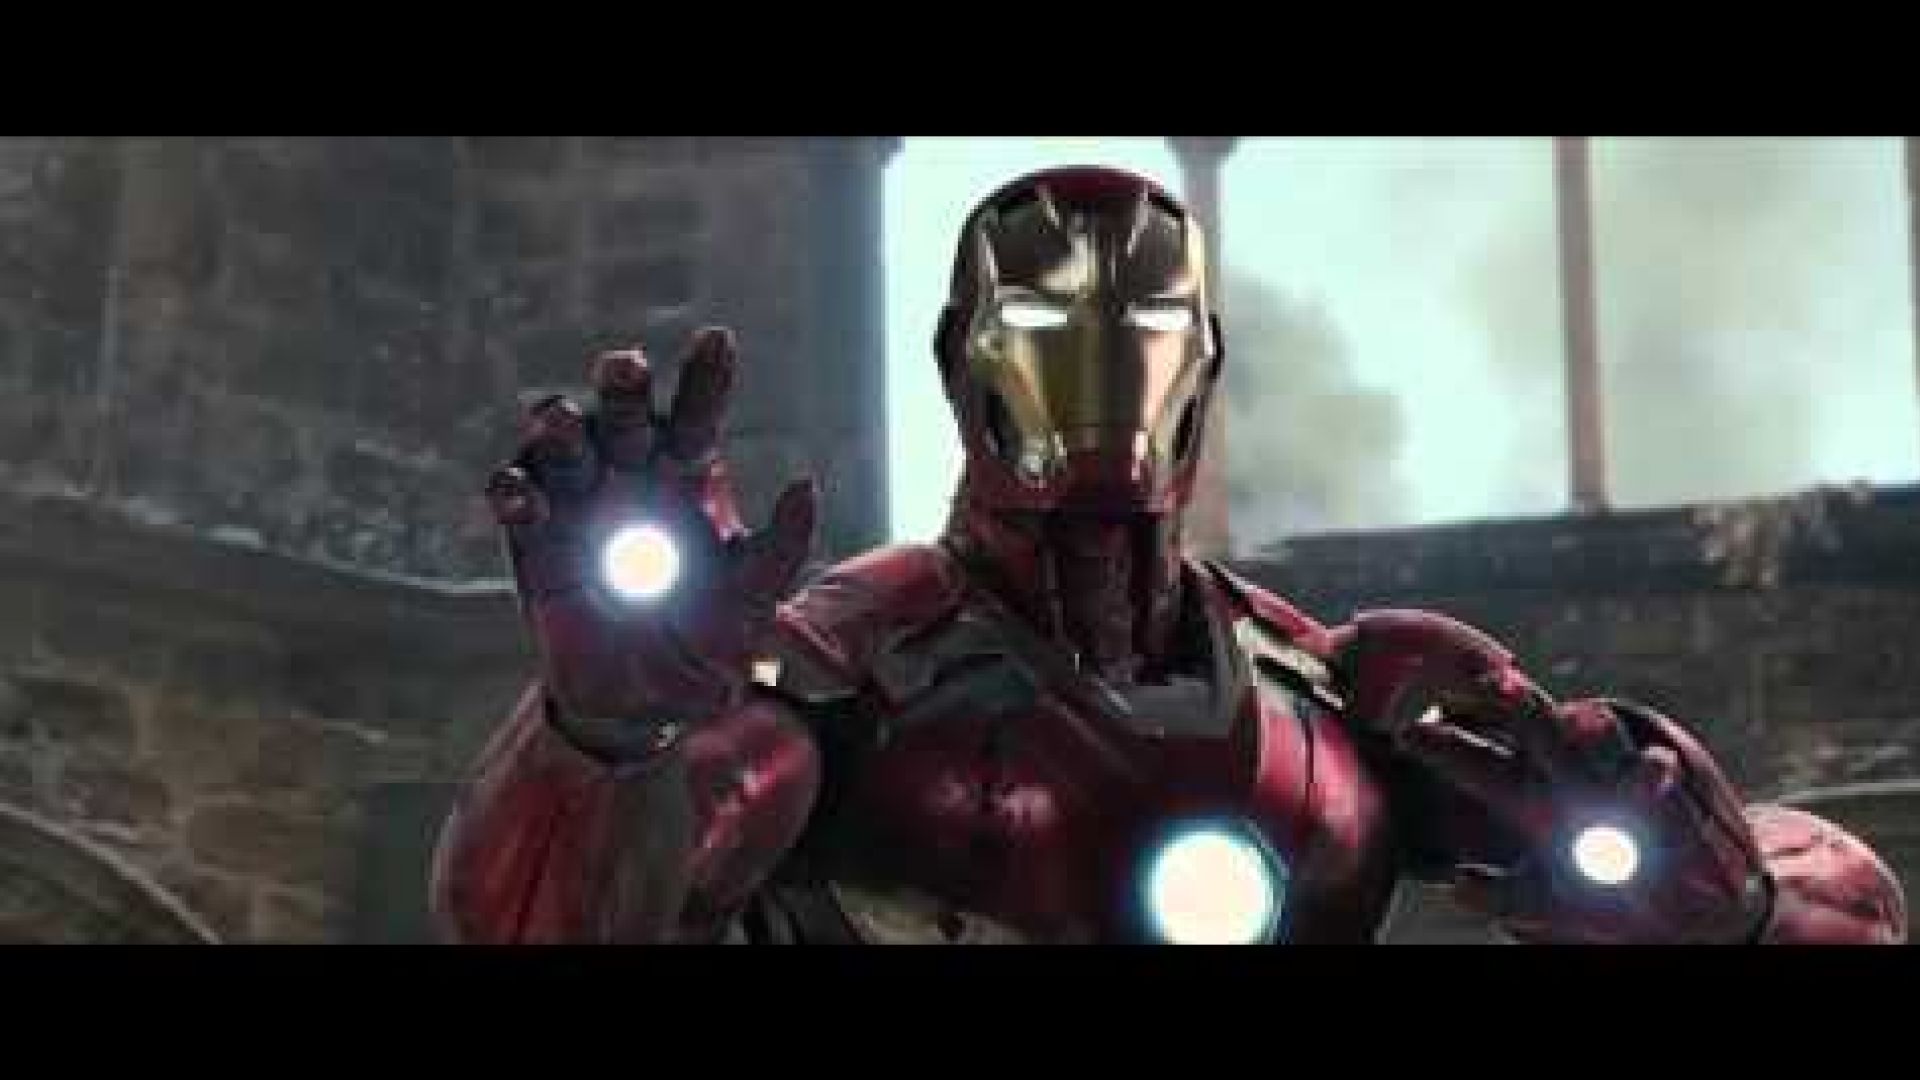 Watch the making-of Avengers: Age of Ultron in this VFX vide